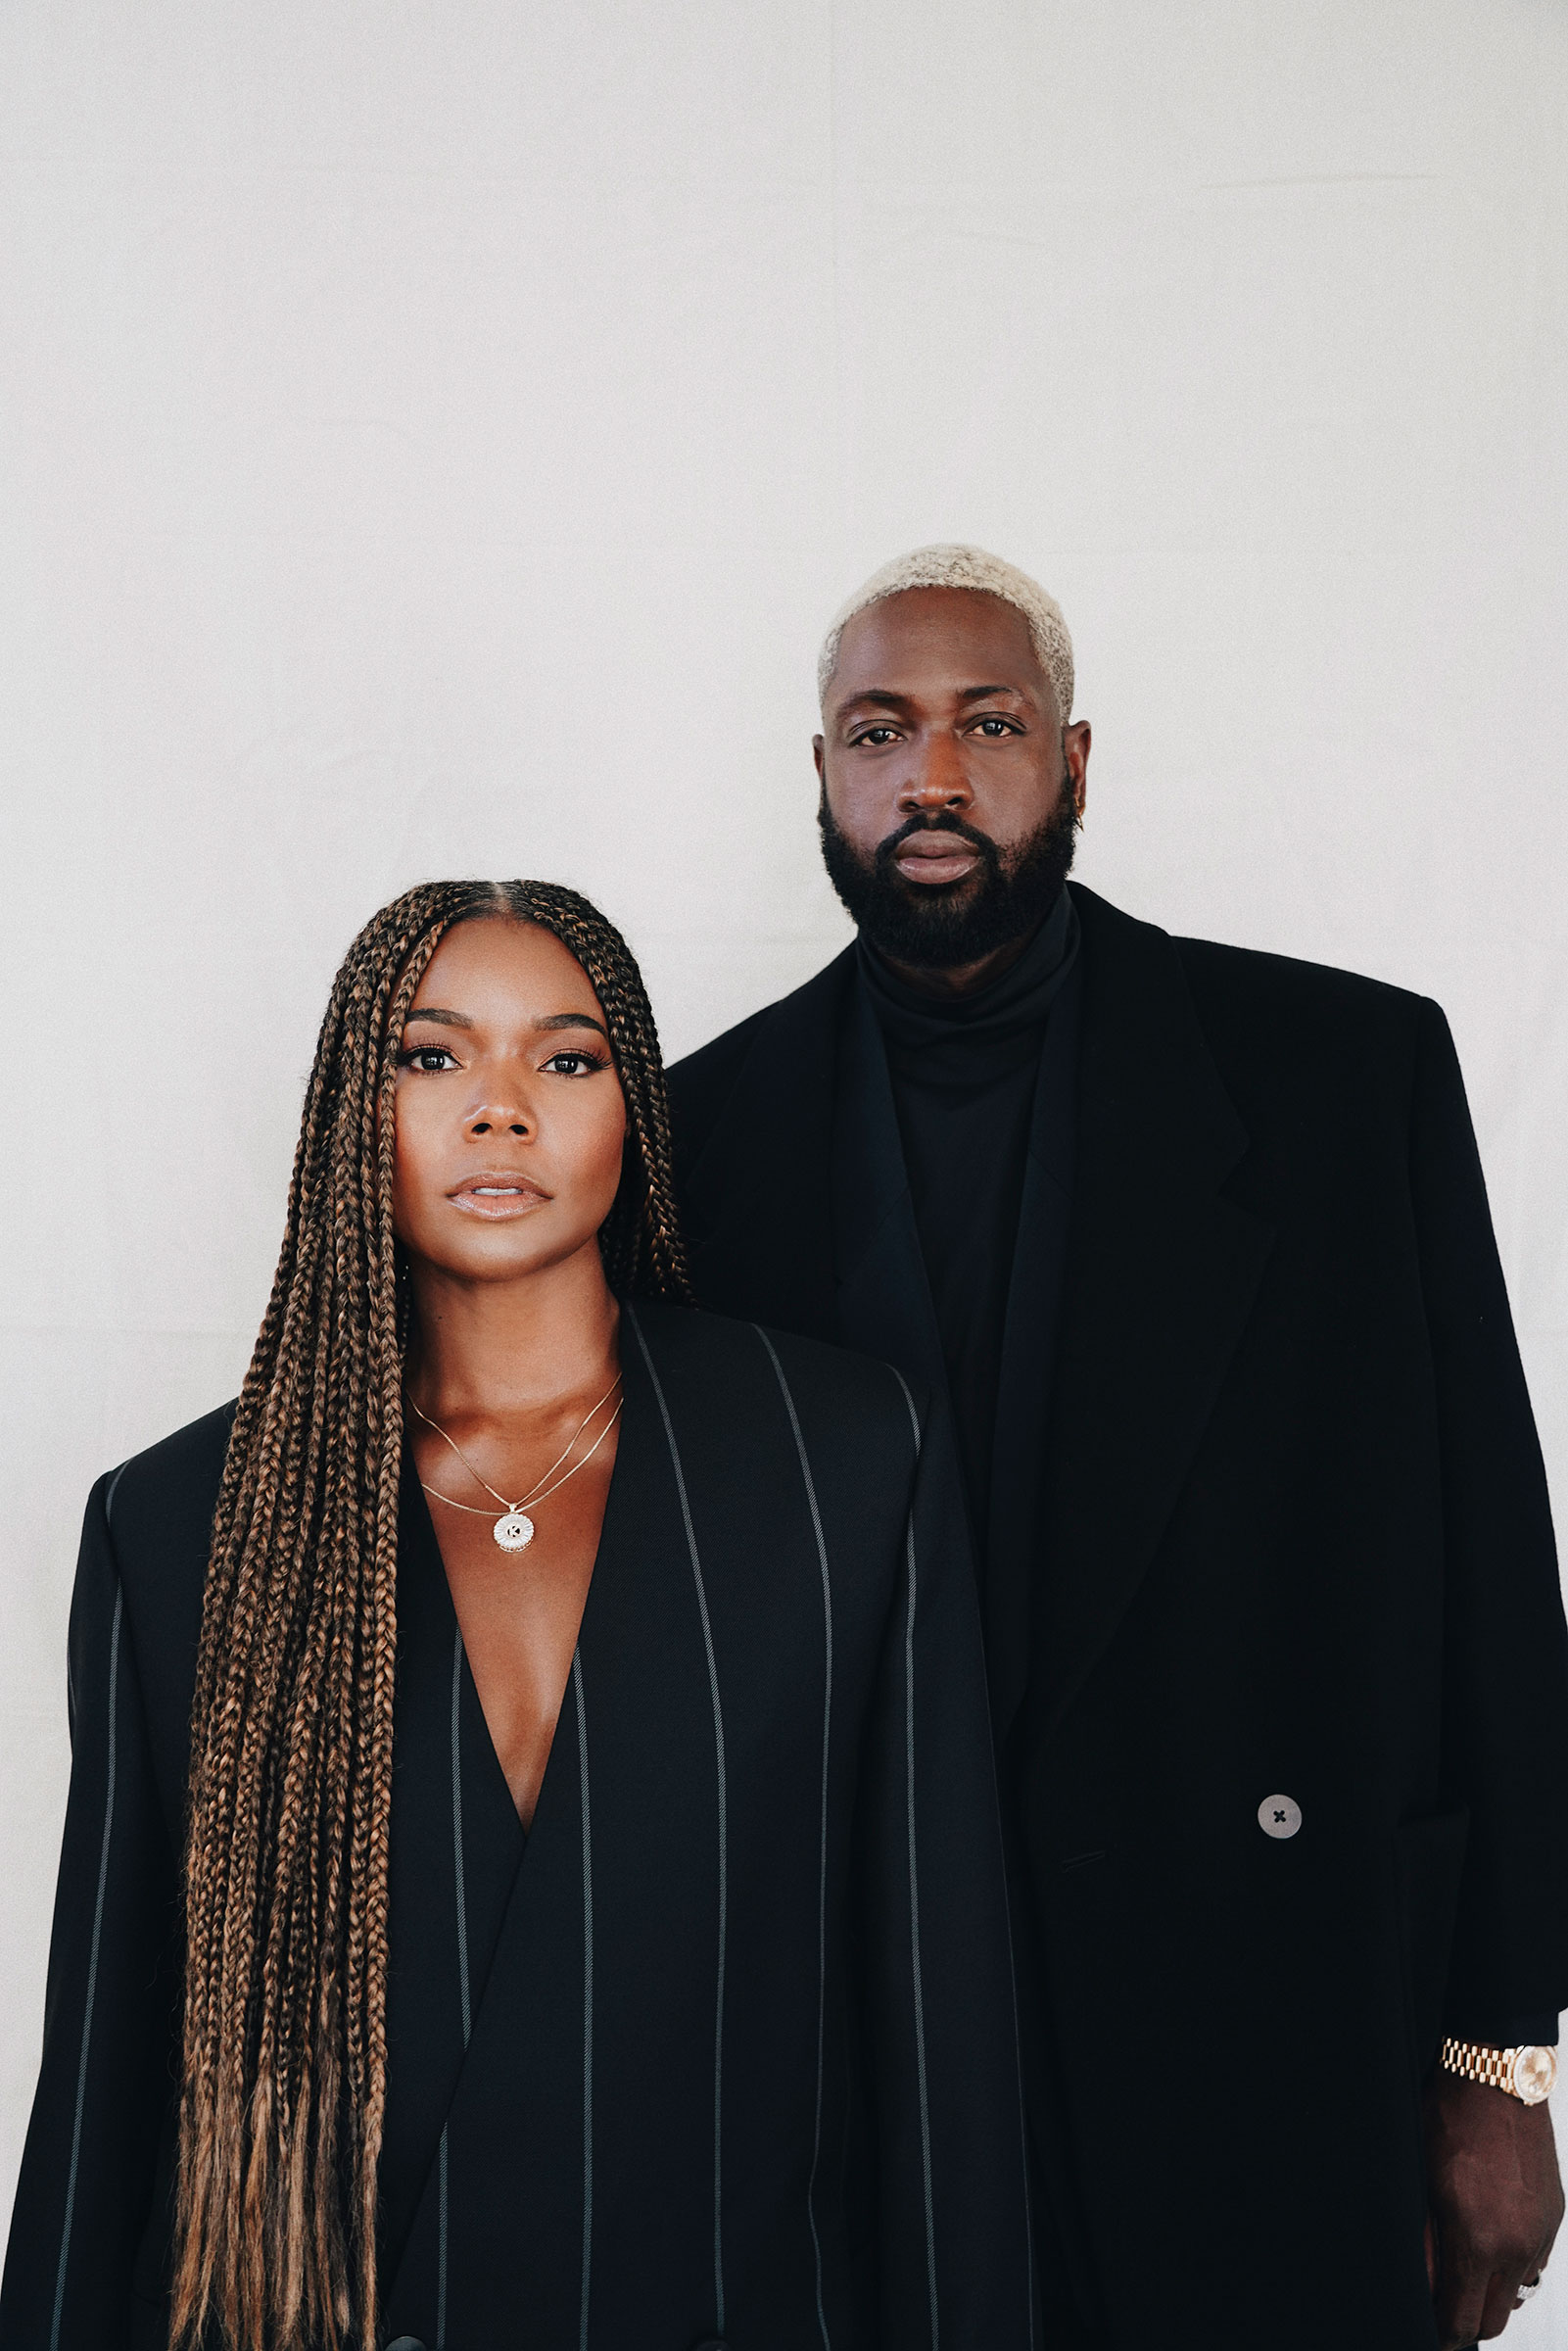 Gabrielle Union and Dwayne WadeTexas Isaiah for TIME